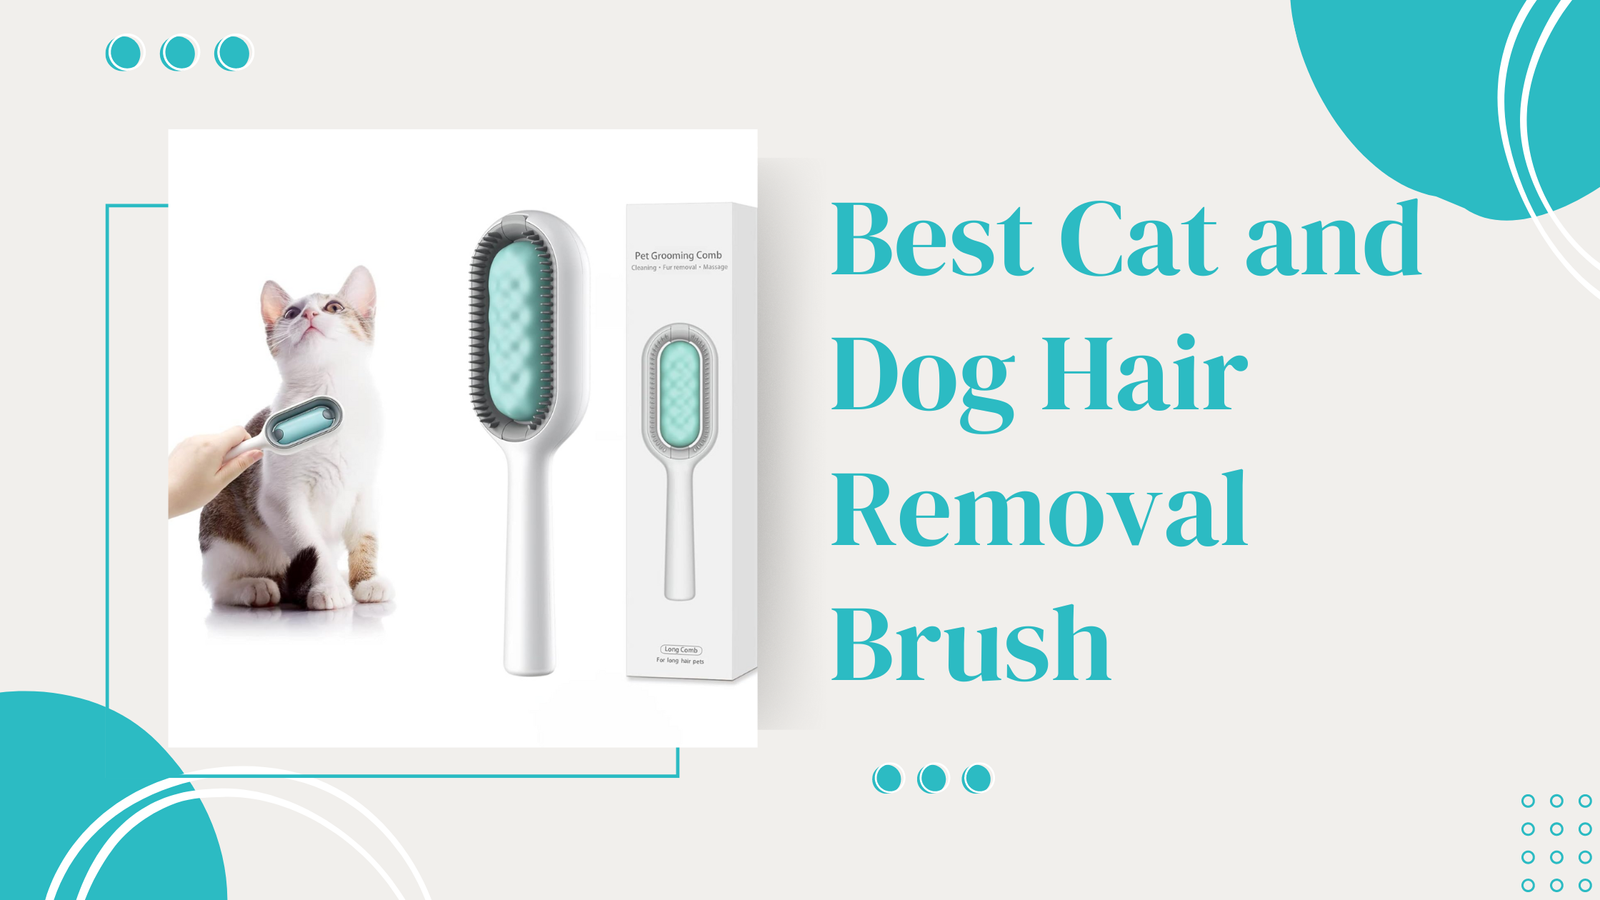 Best Cat and Dog Hair Removal Brush